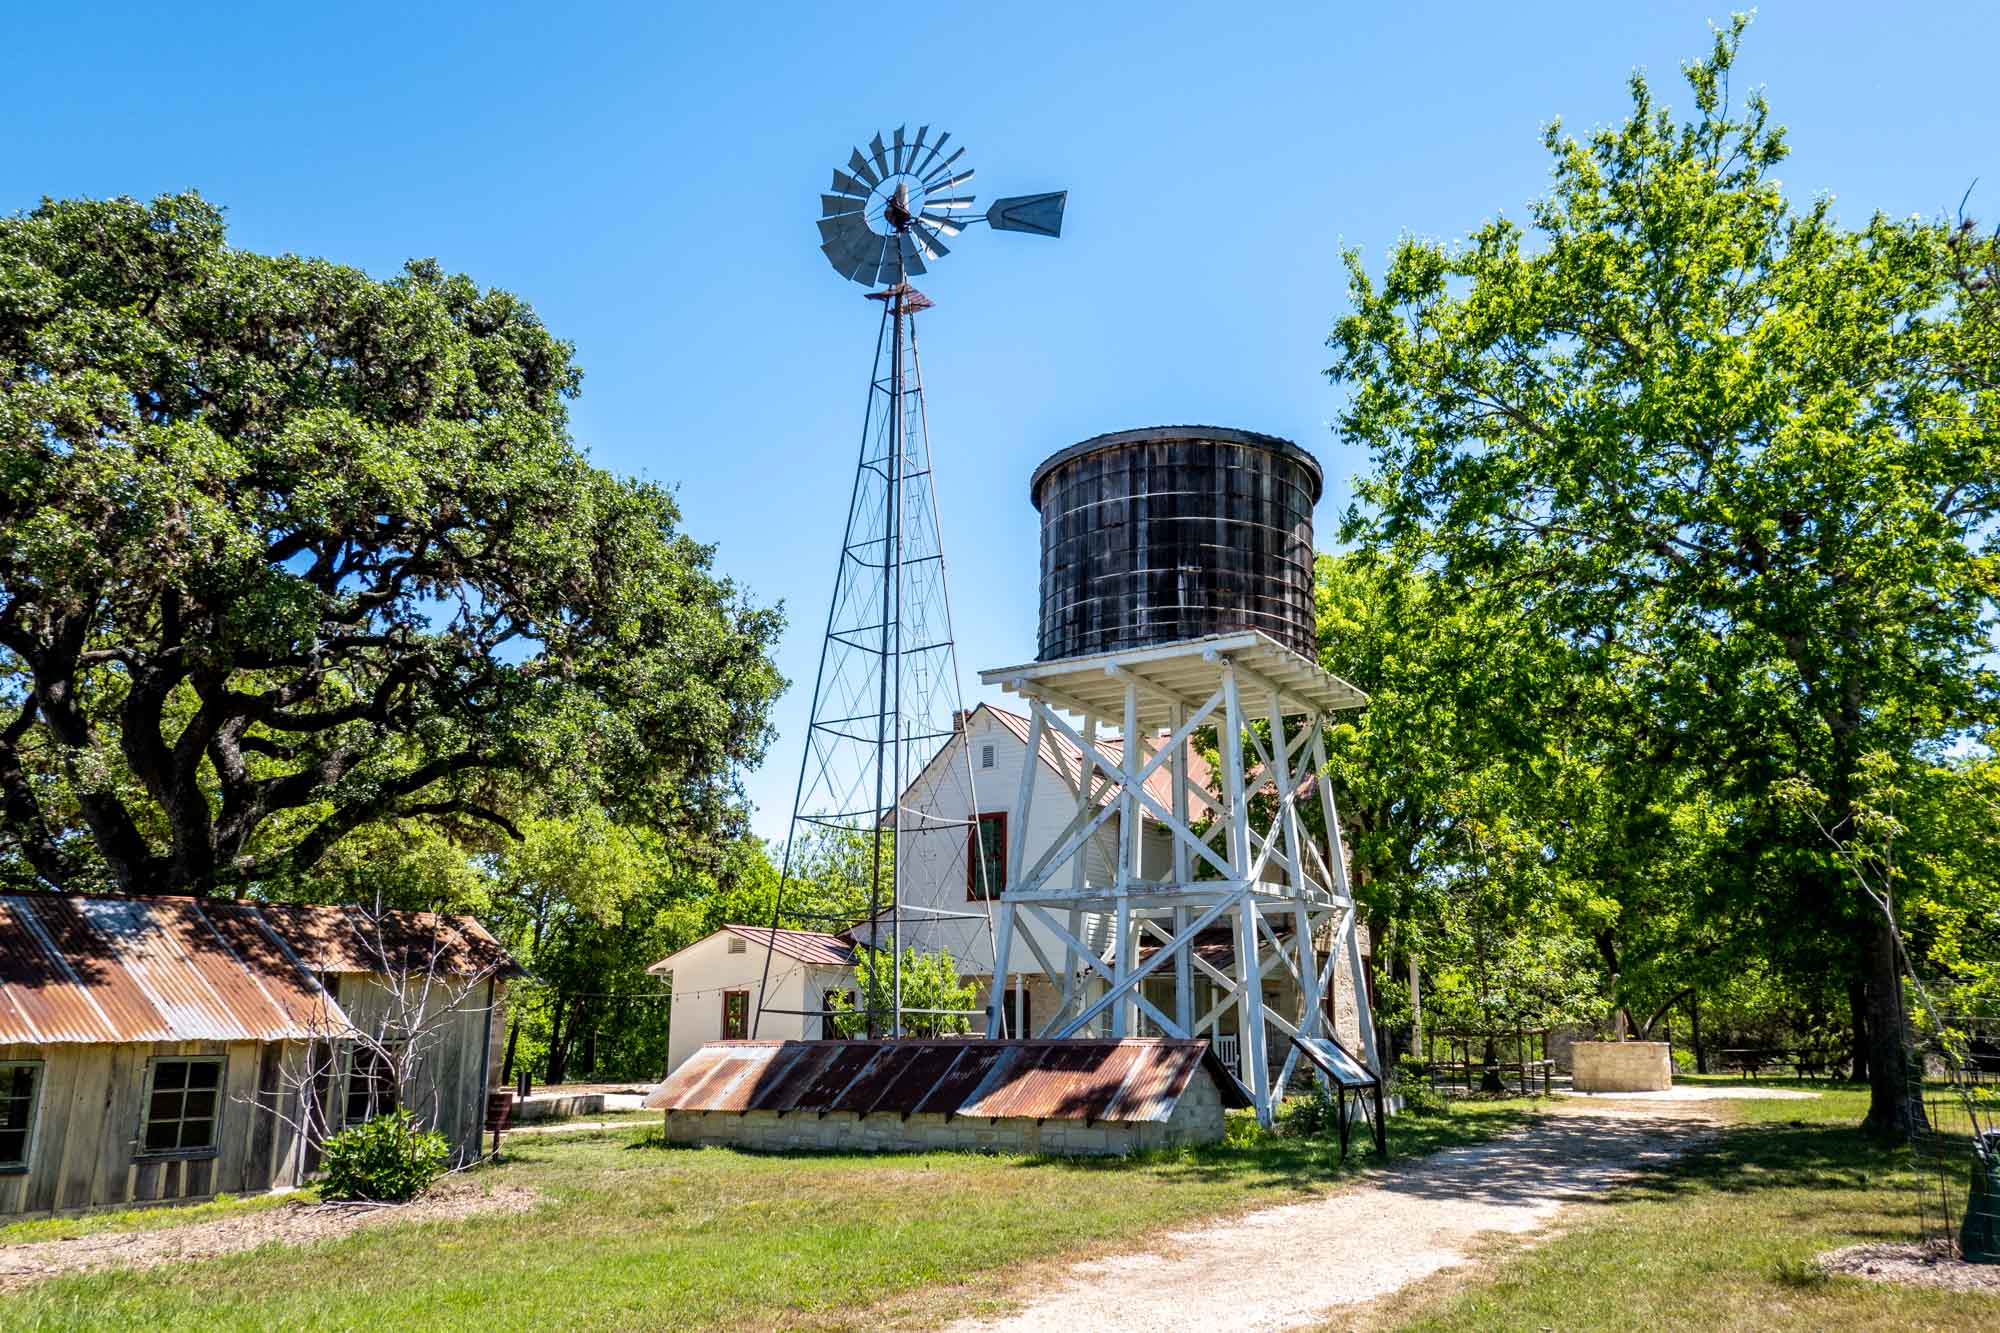 Windmill and water tower near an 1800s homestead.